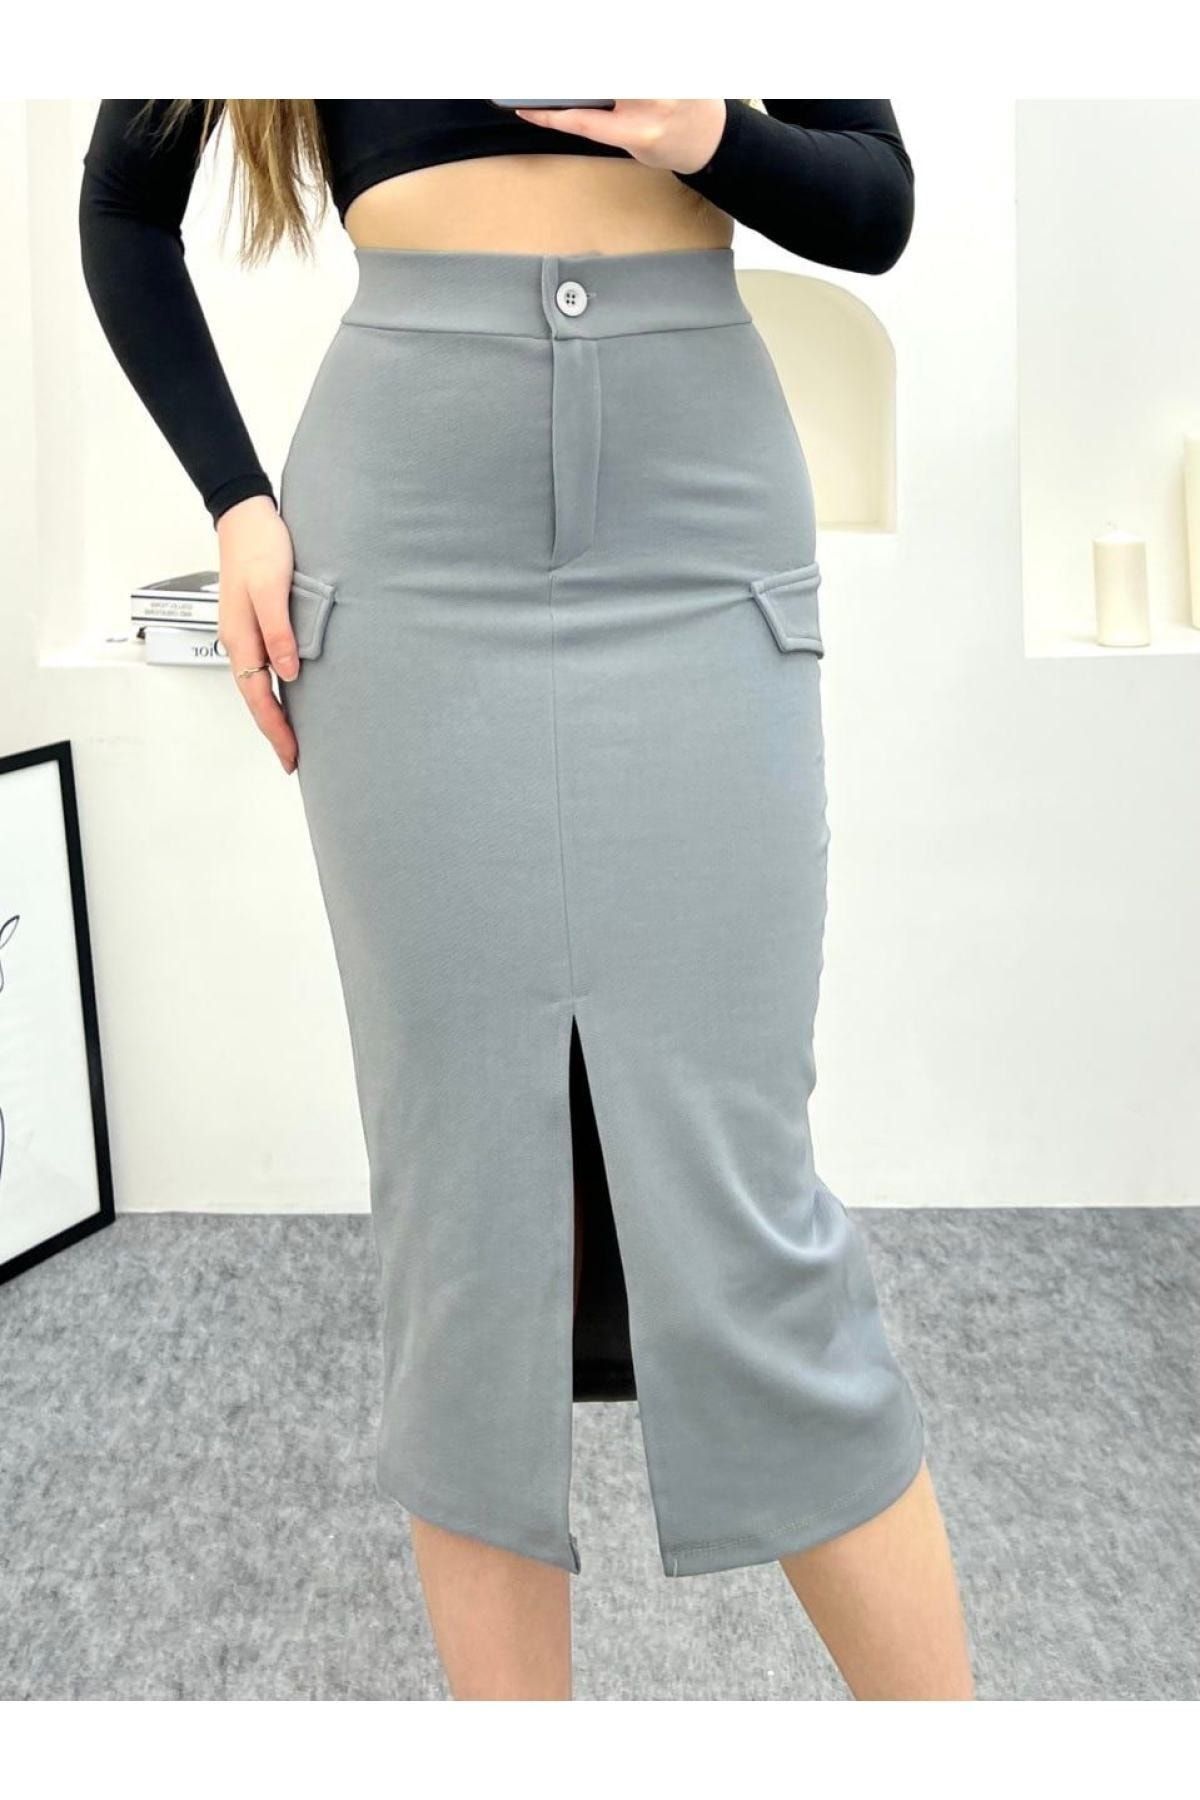 Charcoal Gray Pencil Style Side Pocket Athletic Skirt with